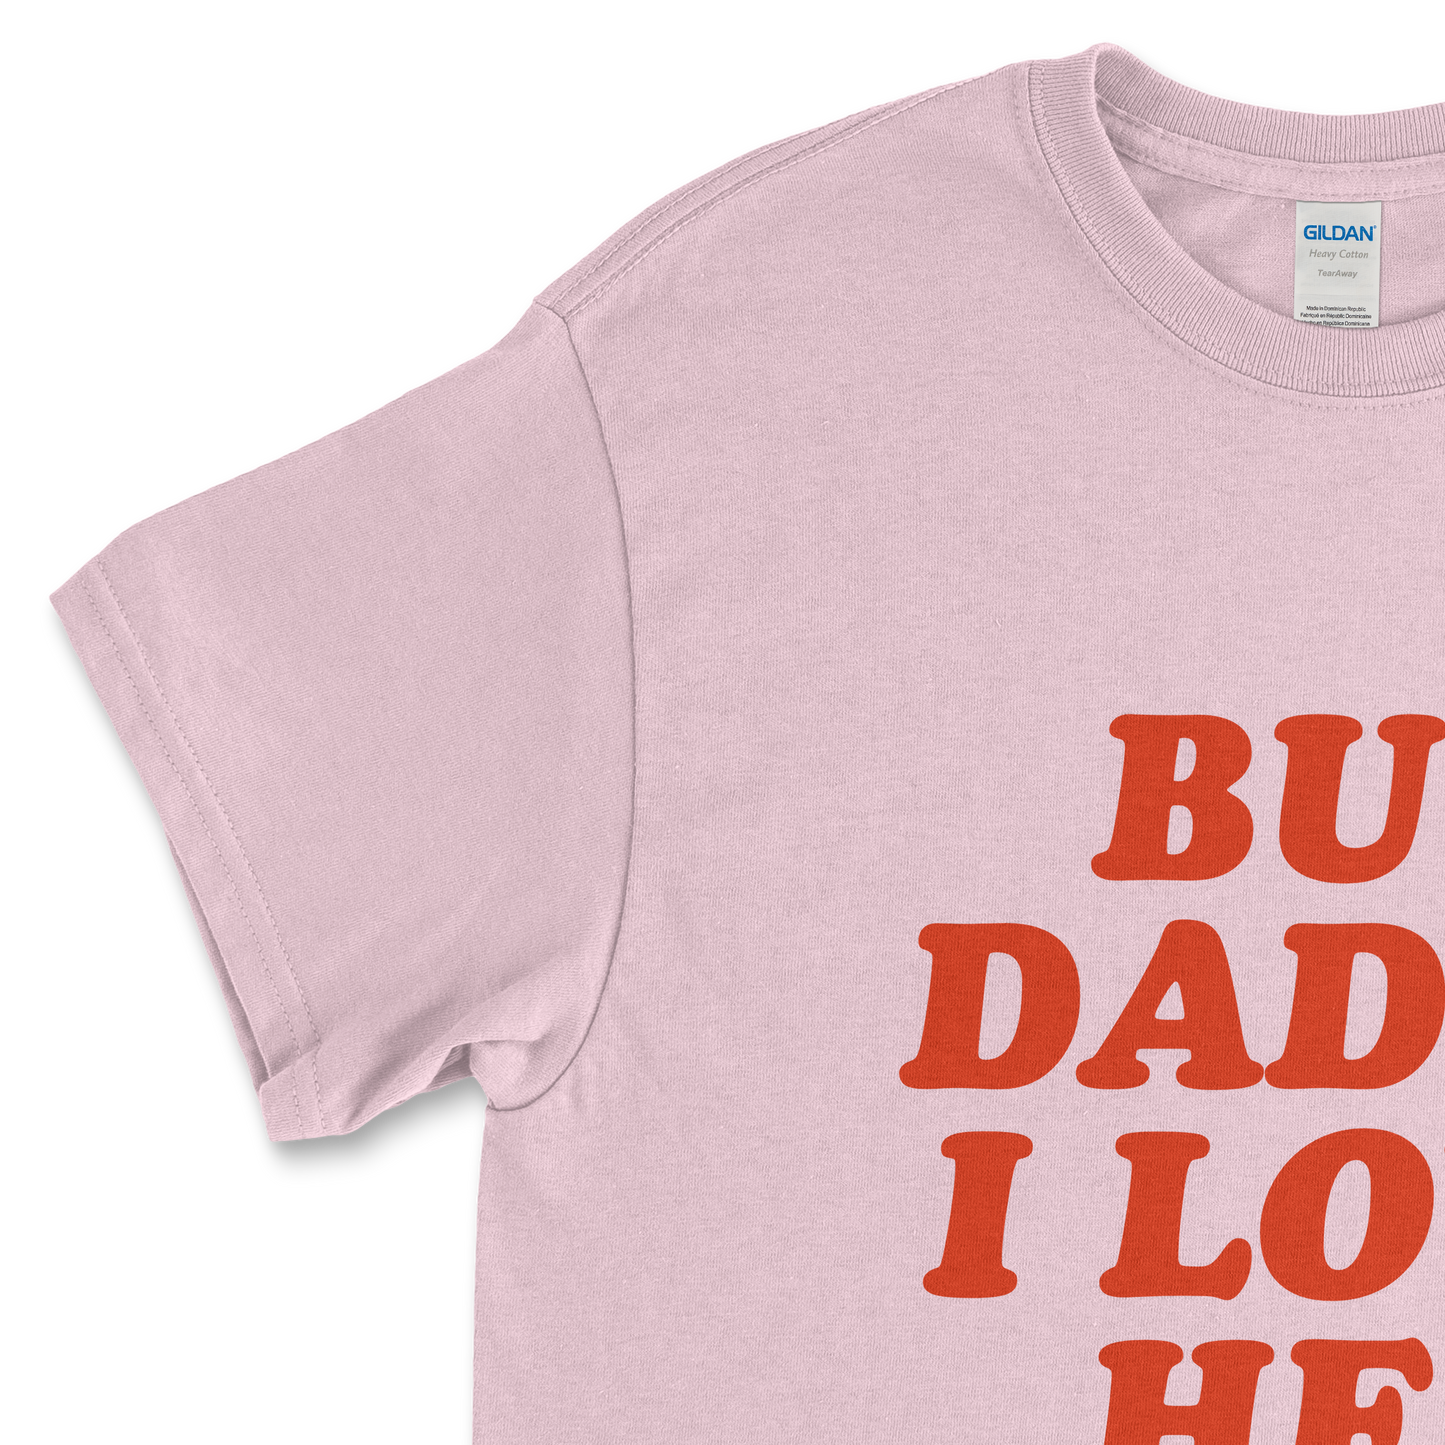 But Daddy I Love Her T-Shirt